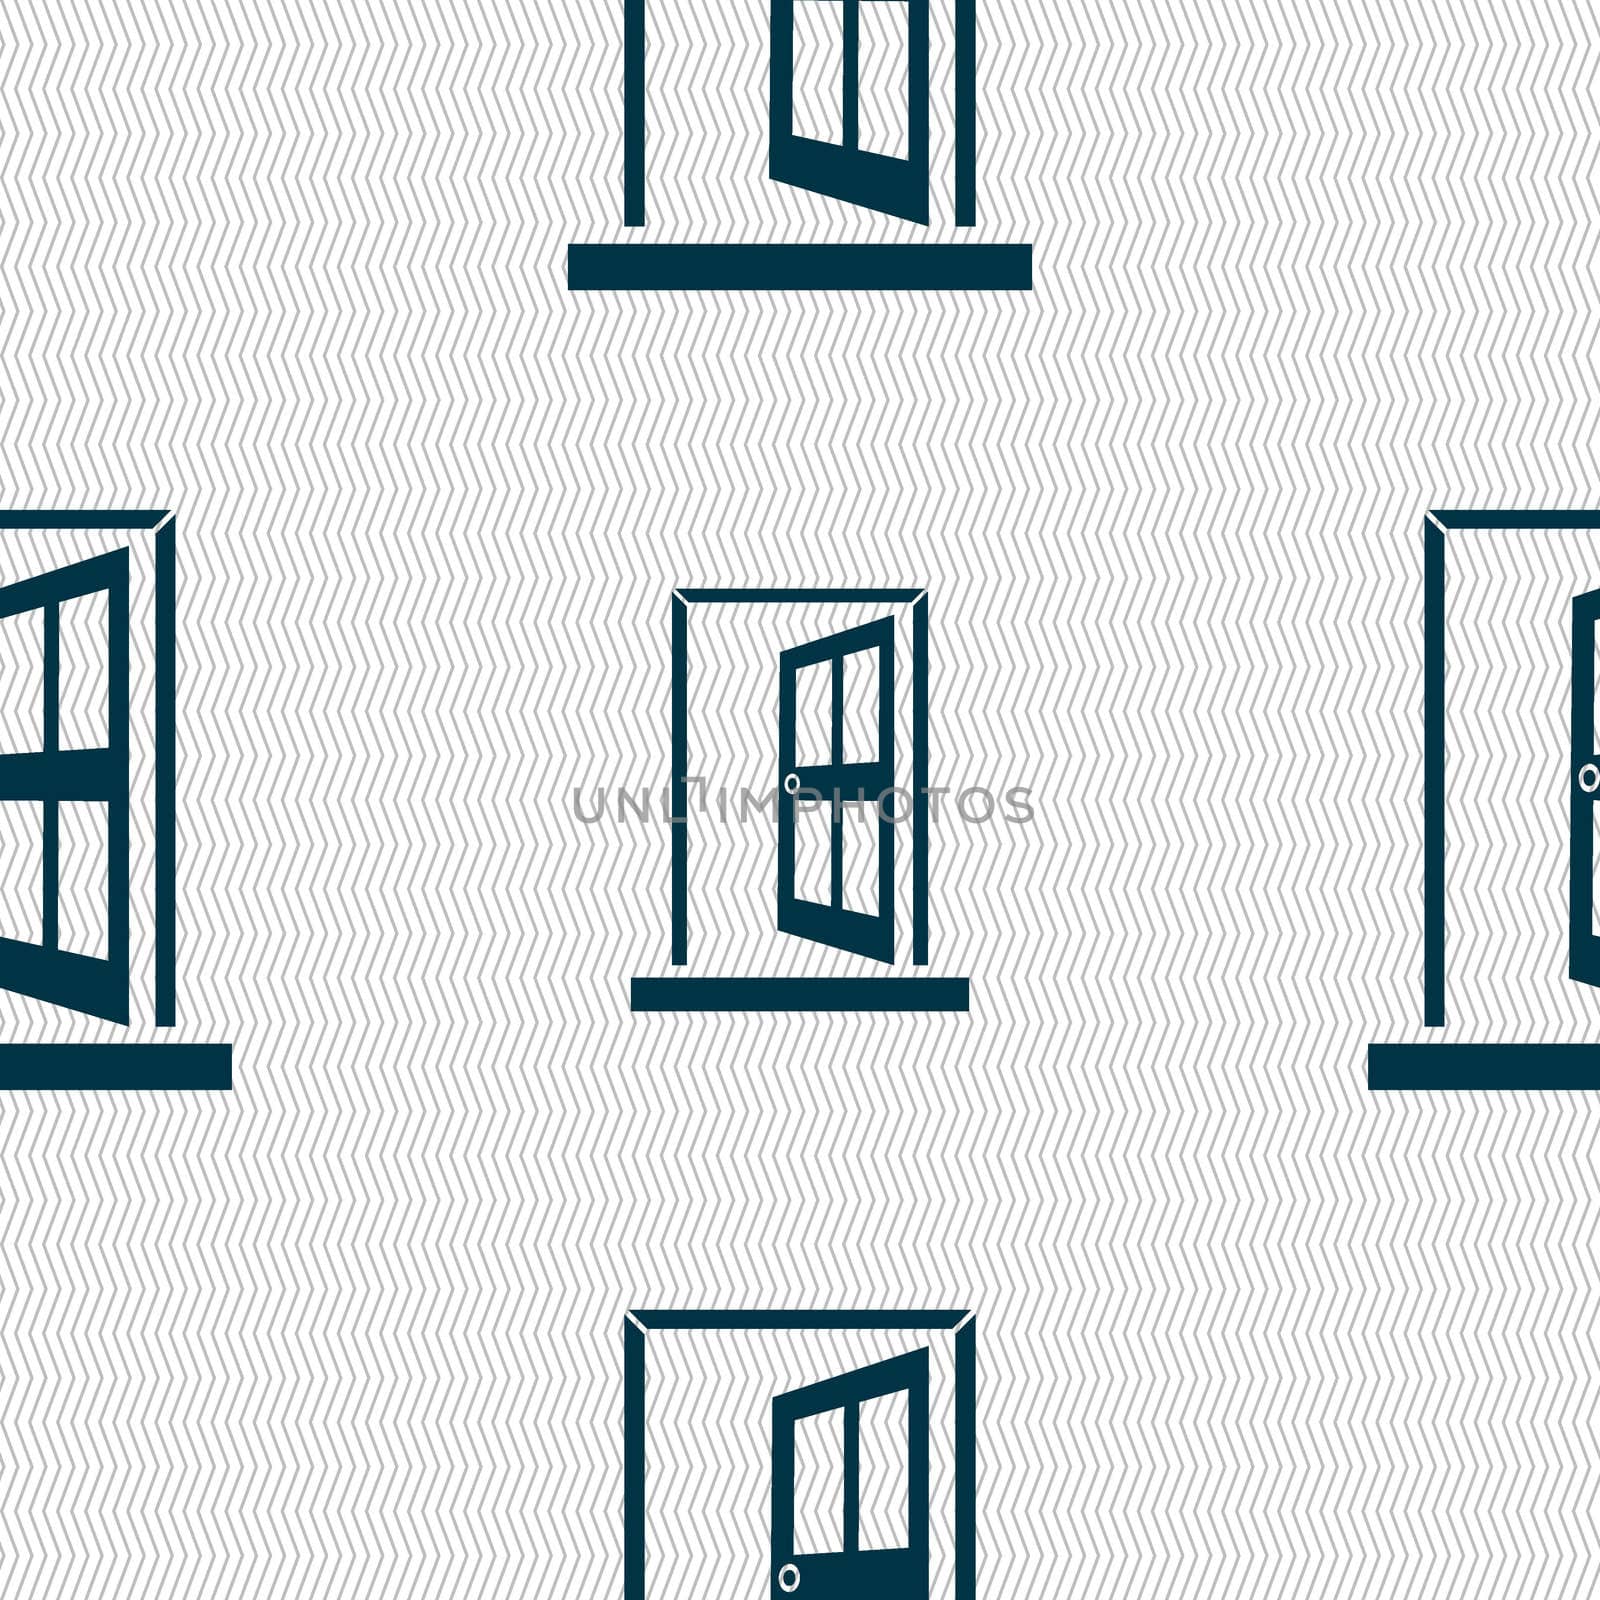 Door, Enter or exit icon sign. Seamless abstract background with geometric shapes.  by serhii_lohvyniuk